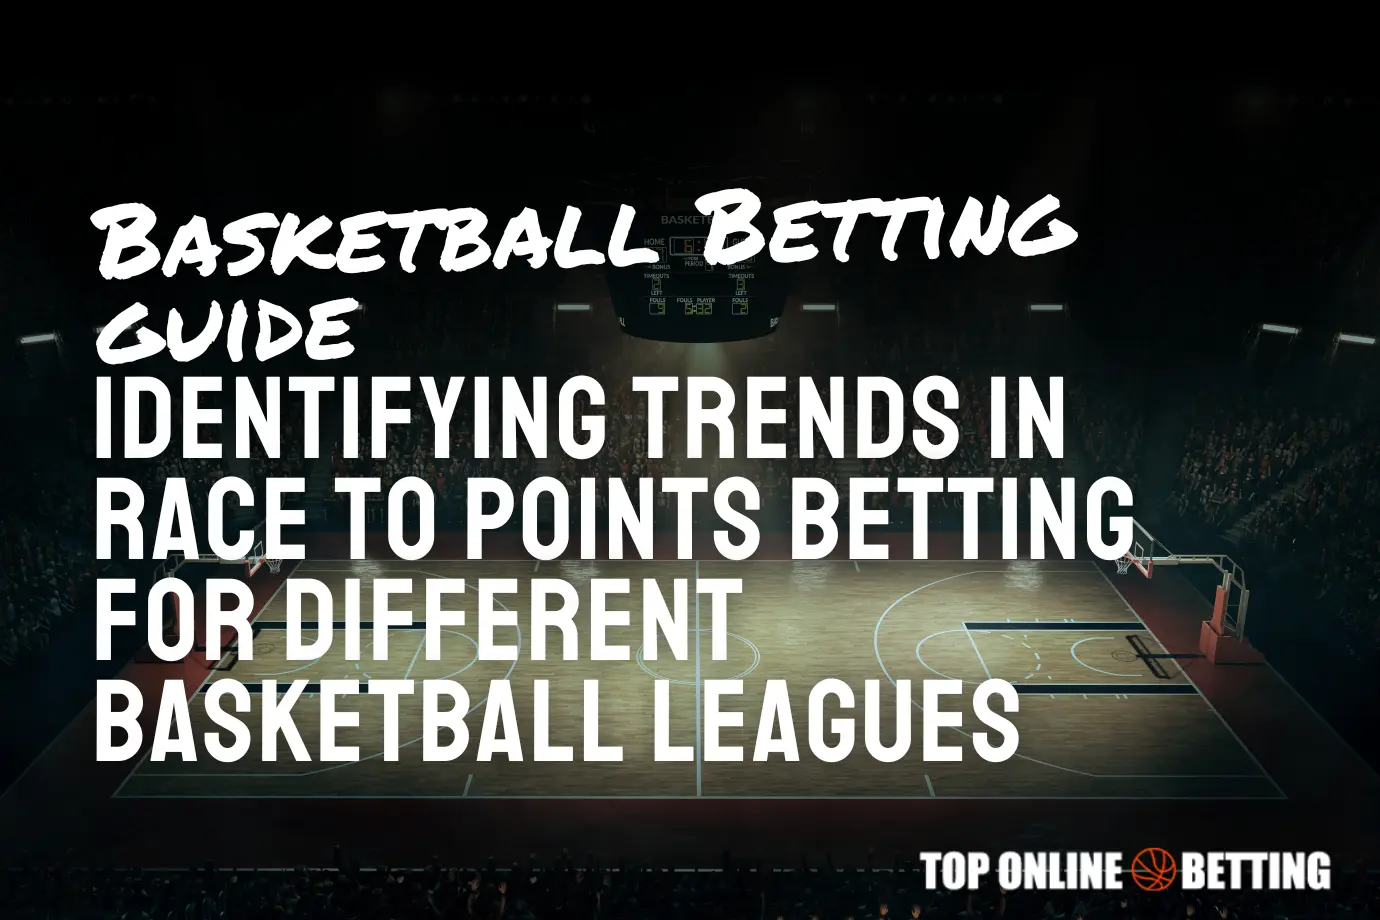 Identifying Trends in Race to Points Betting for Different Basketball Leagues